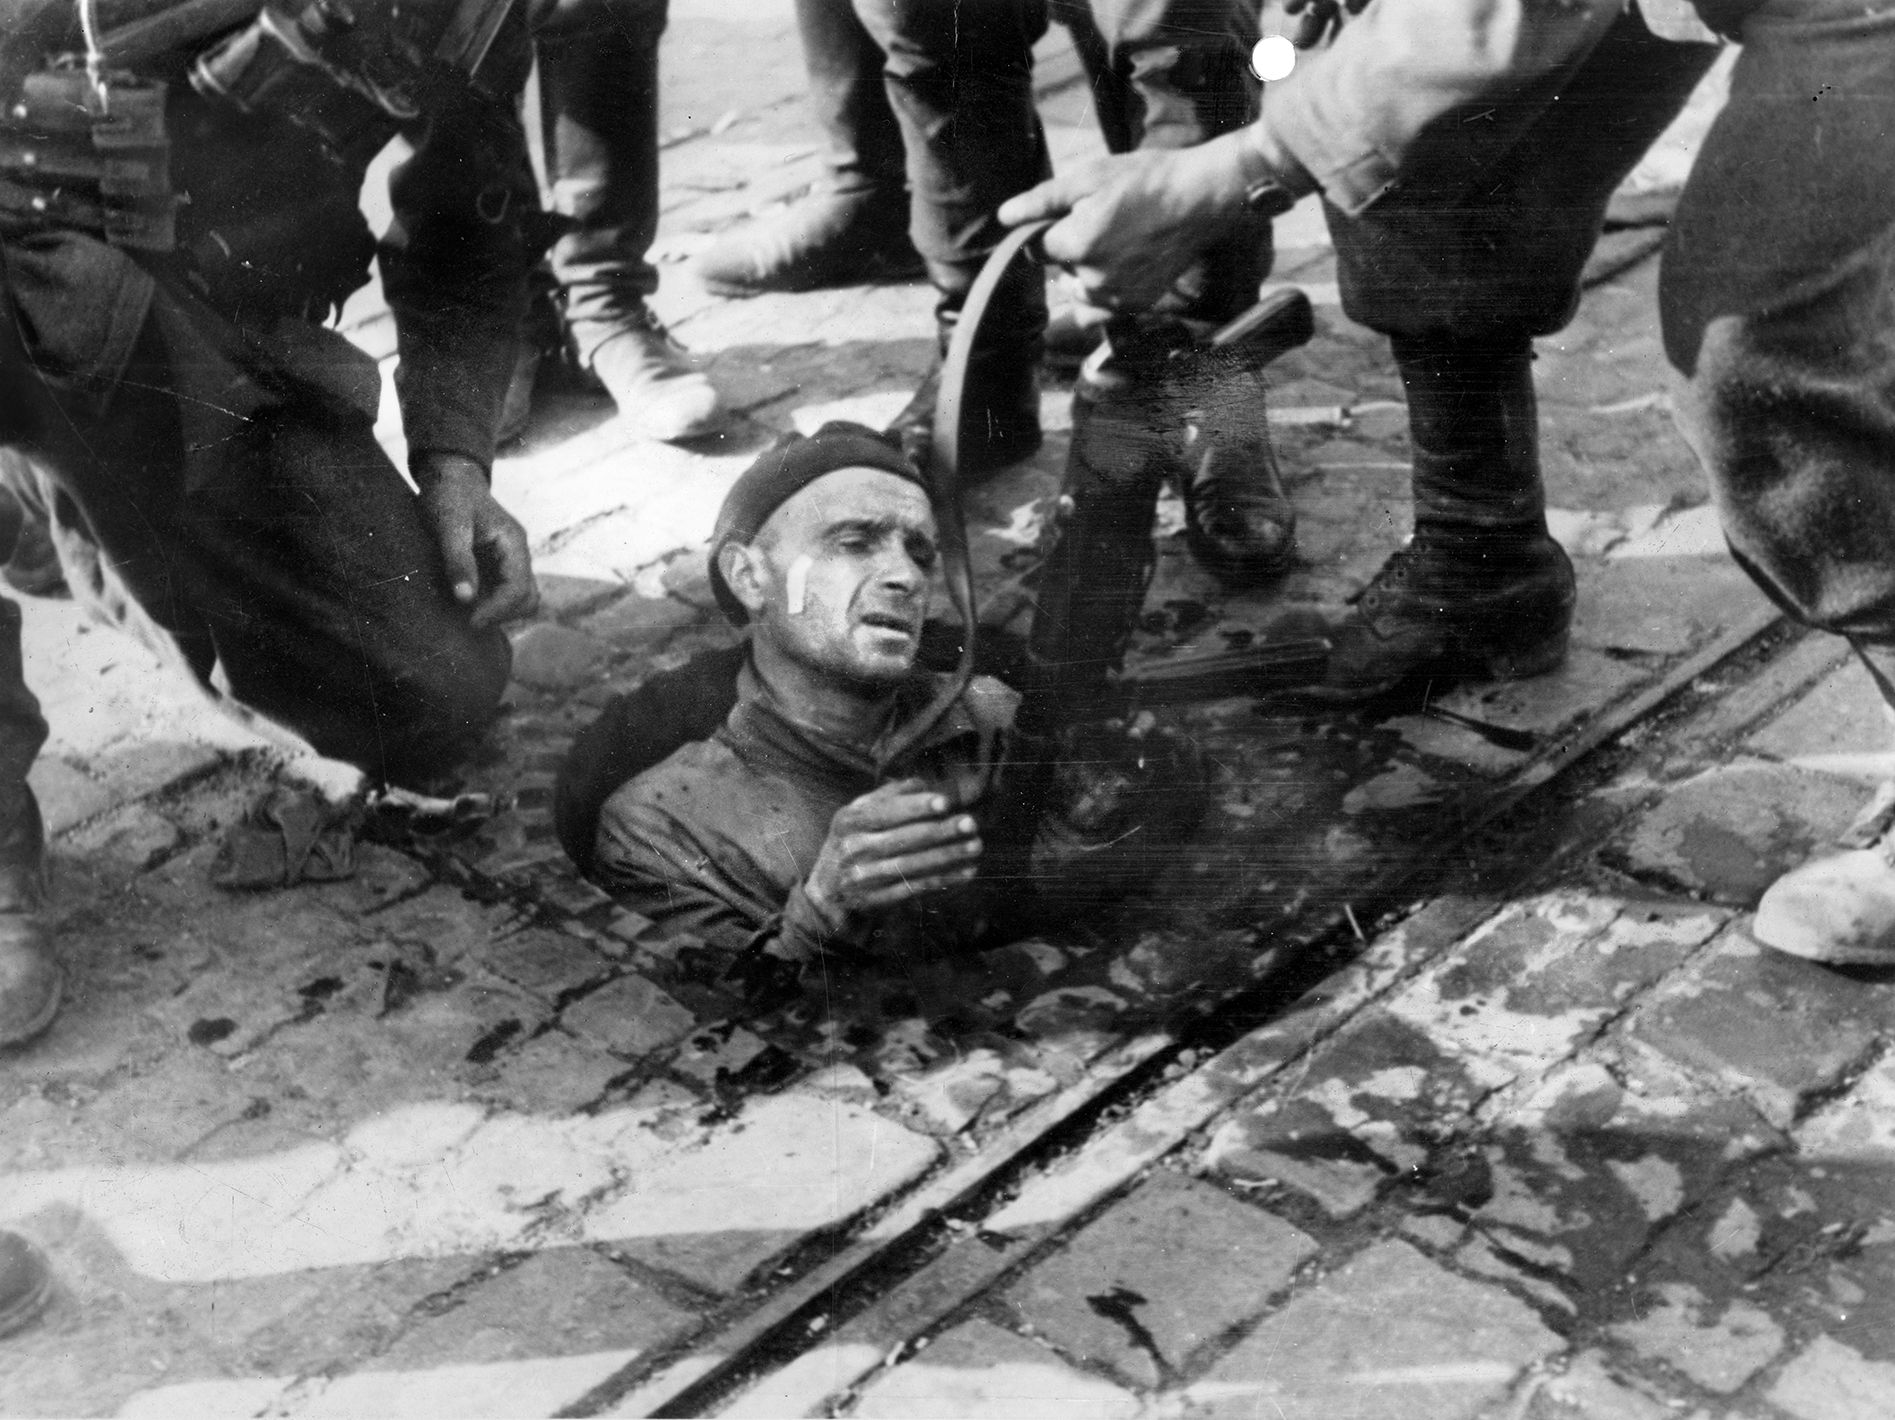 A Polish fighter is pulled from his hiding place in a sewer and taken prisoner by German soldiers. He was probably executed.